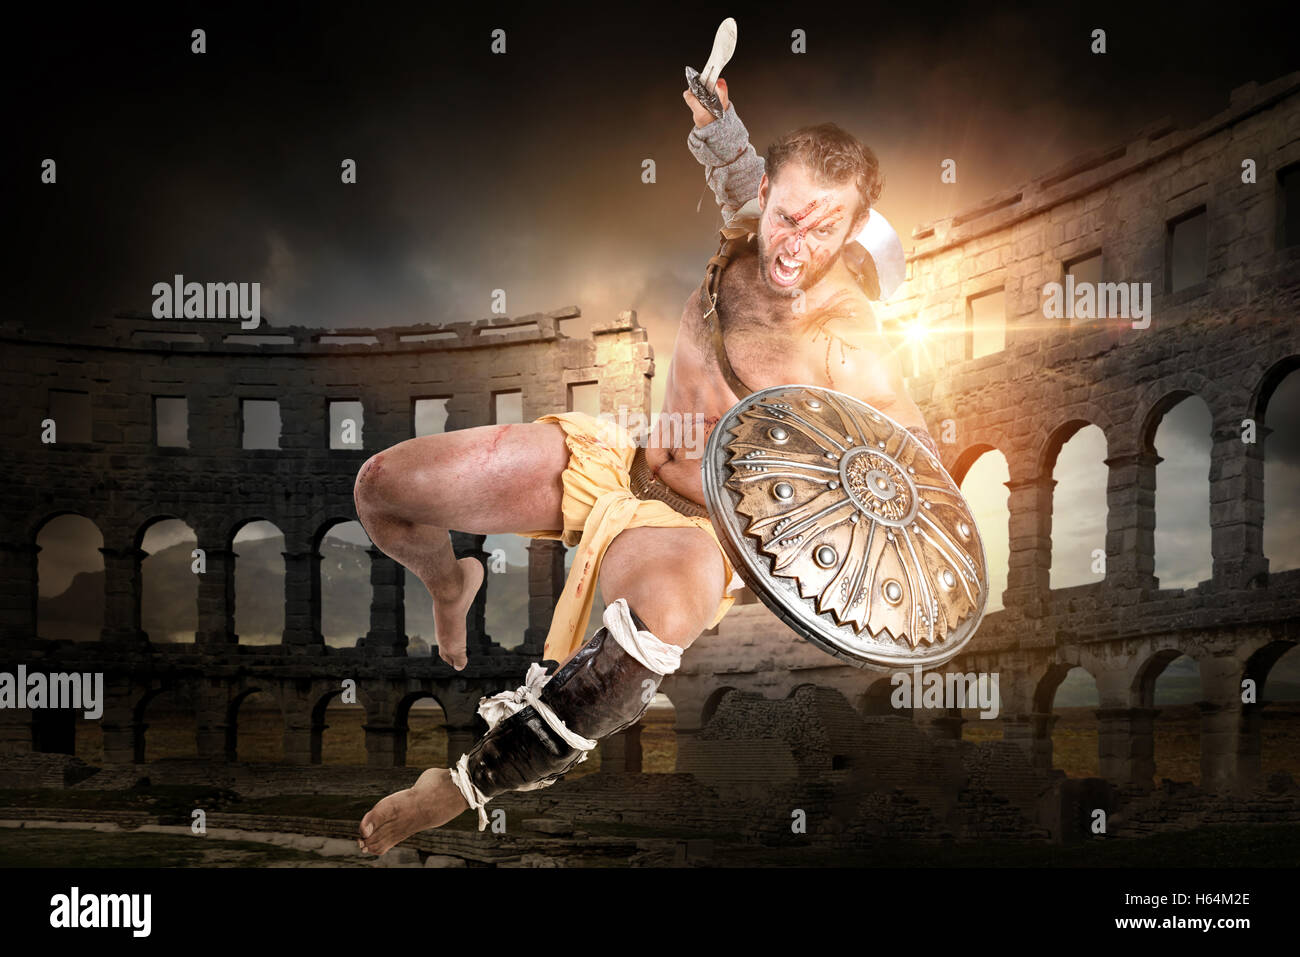 Ancient warrior or Gladiator ready to fight in the arena Stock Photo